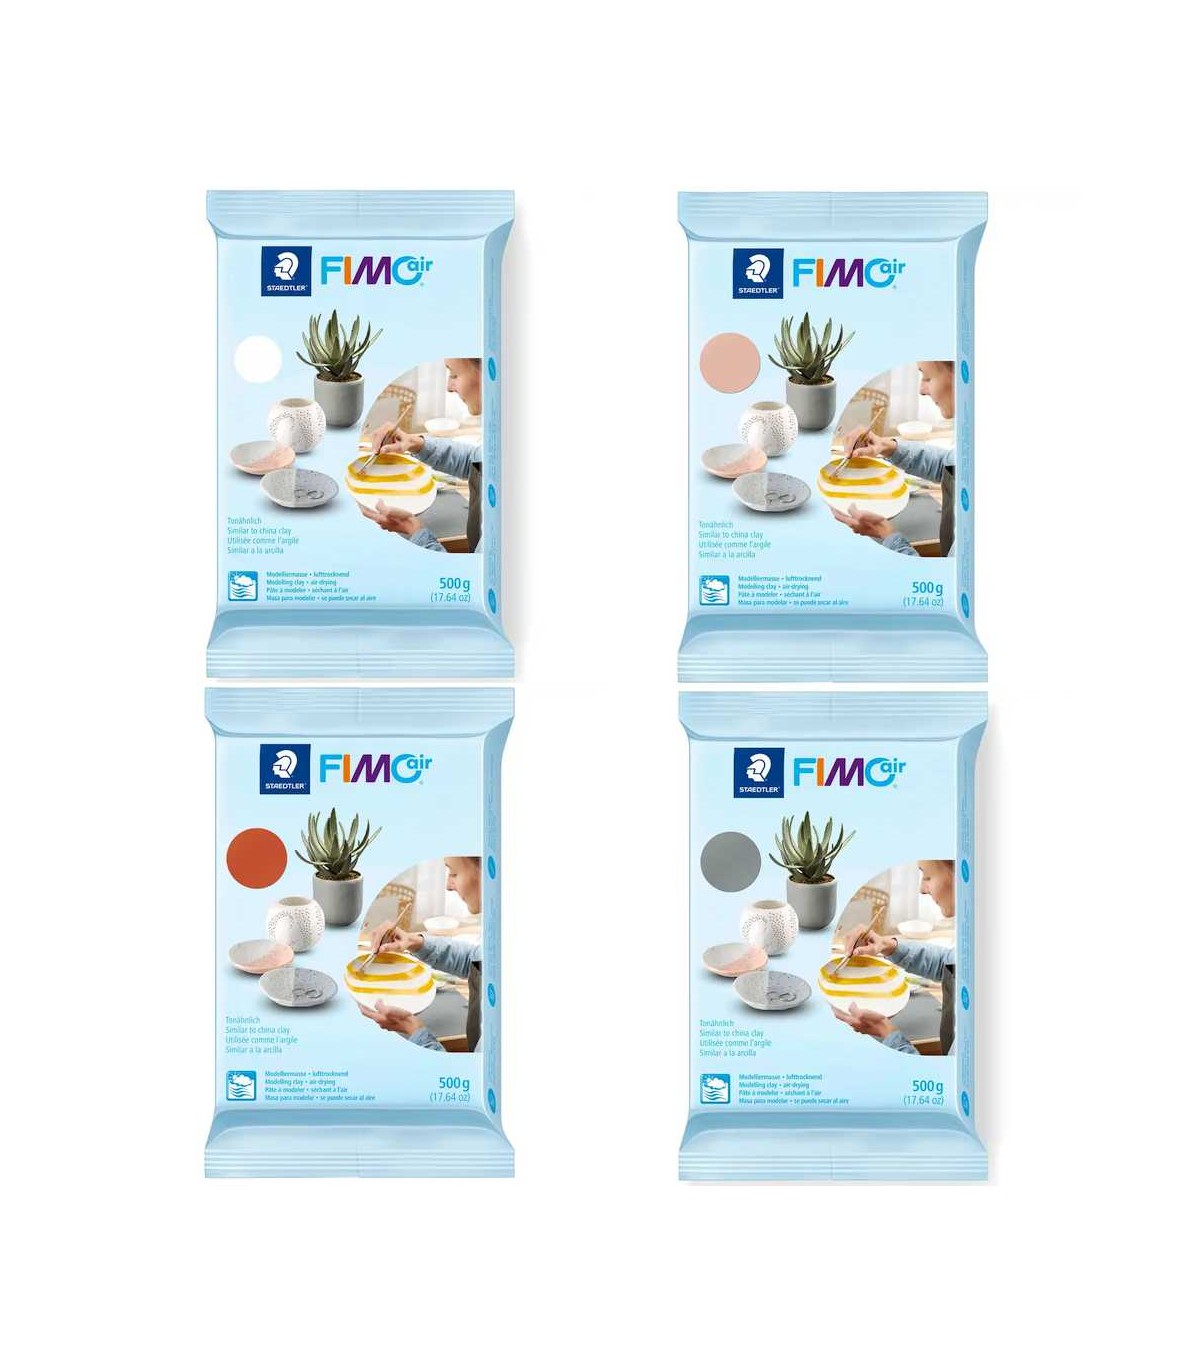 FIMOair Basic » The most widely used FIMO air-drying paste